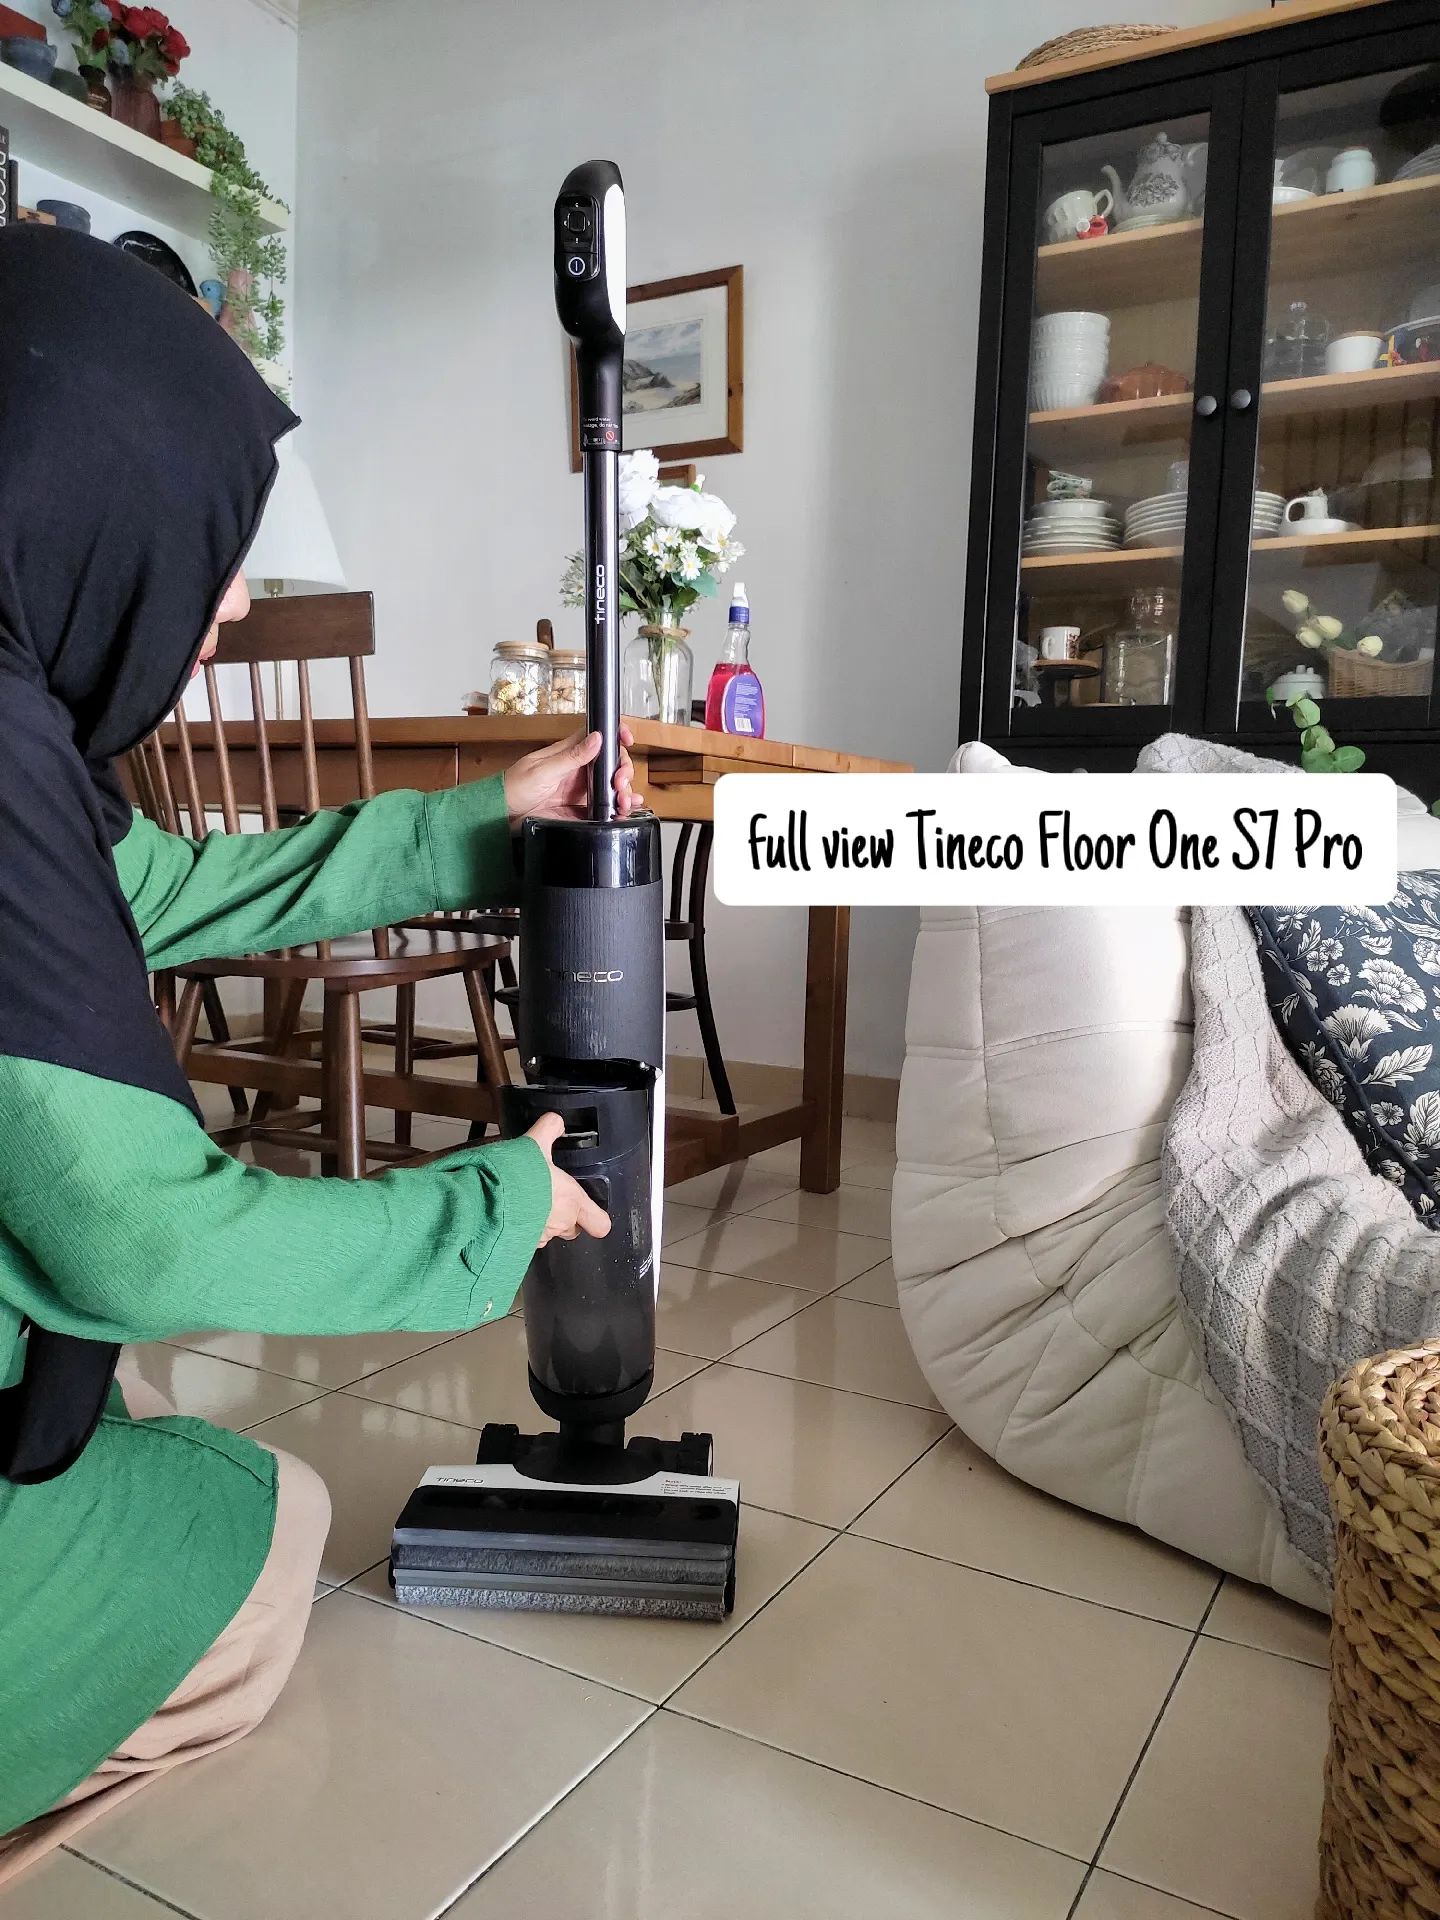 Tineco Floor One S7 Pro review: 'This is a good vacuum cleaner